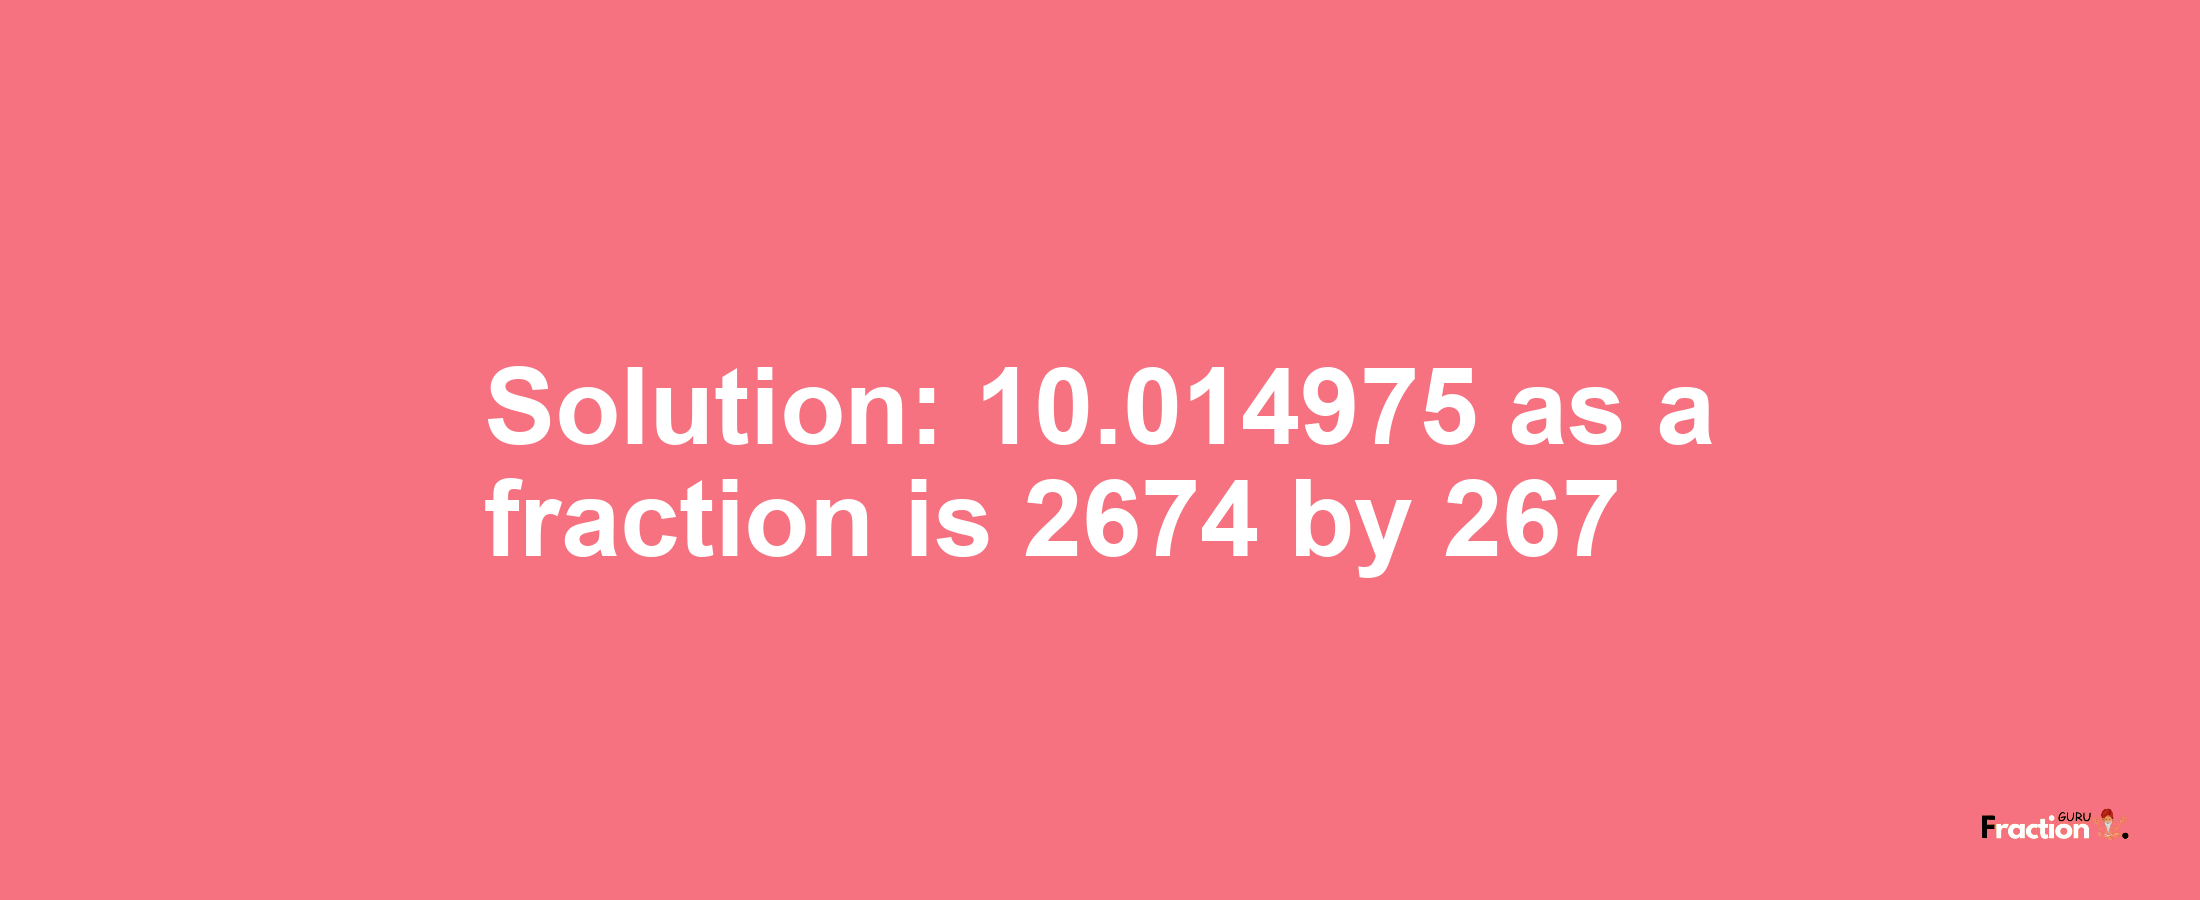 Solution:10.014975 as a fraction is 2674/267